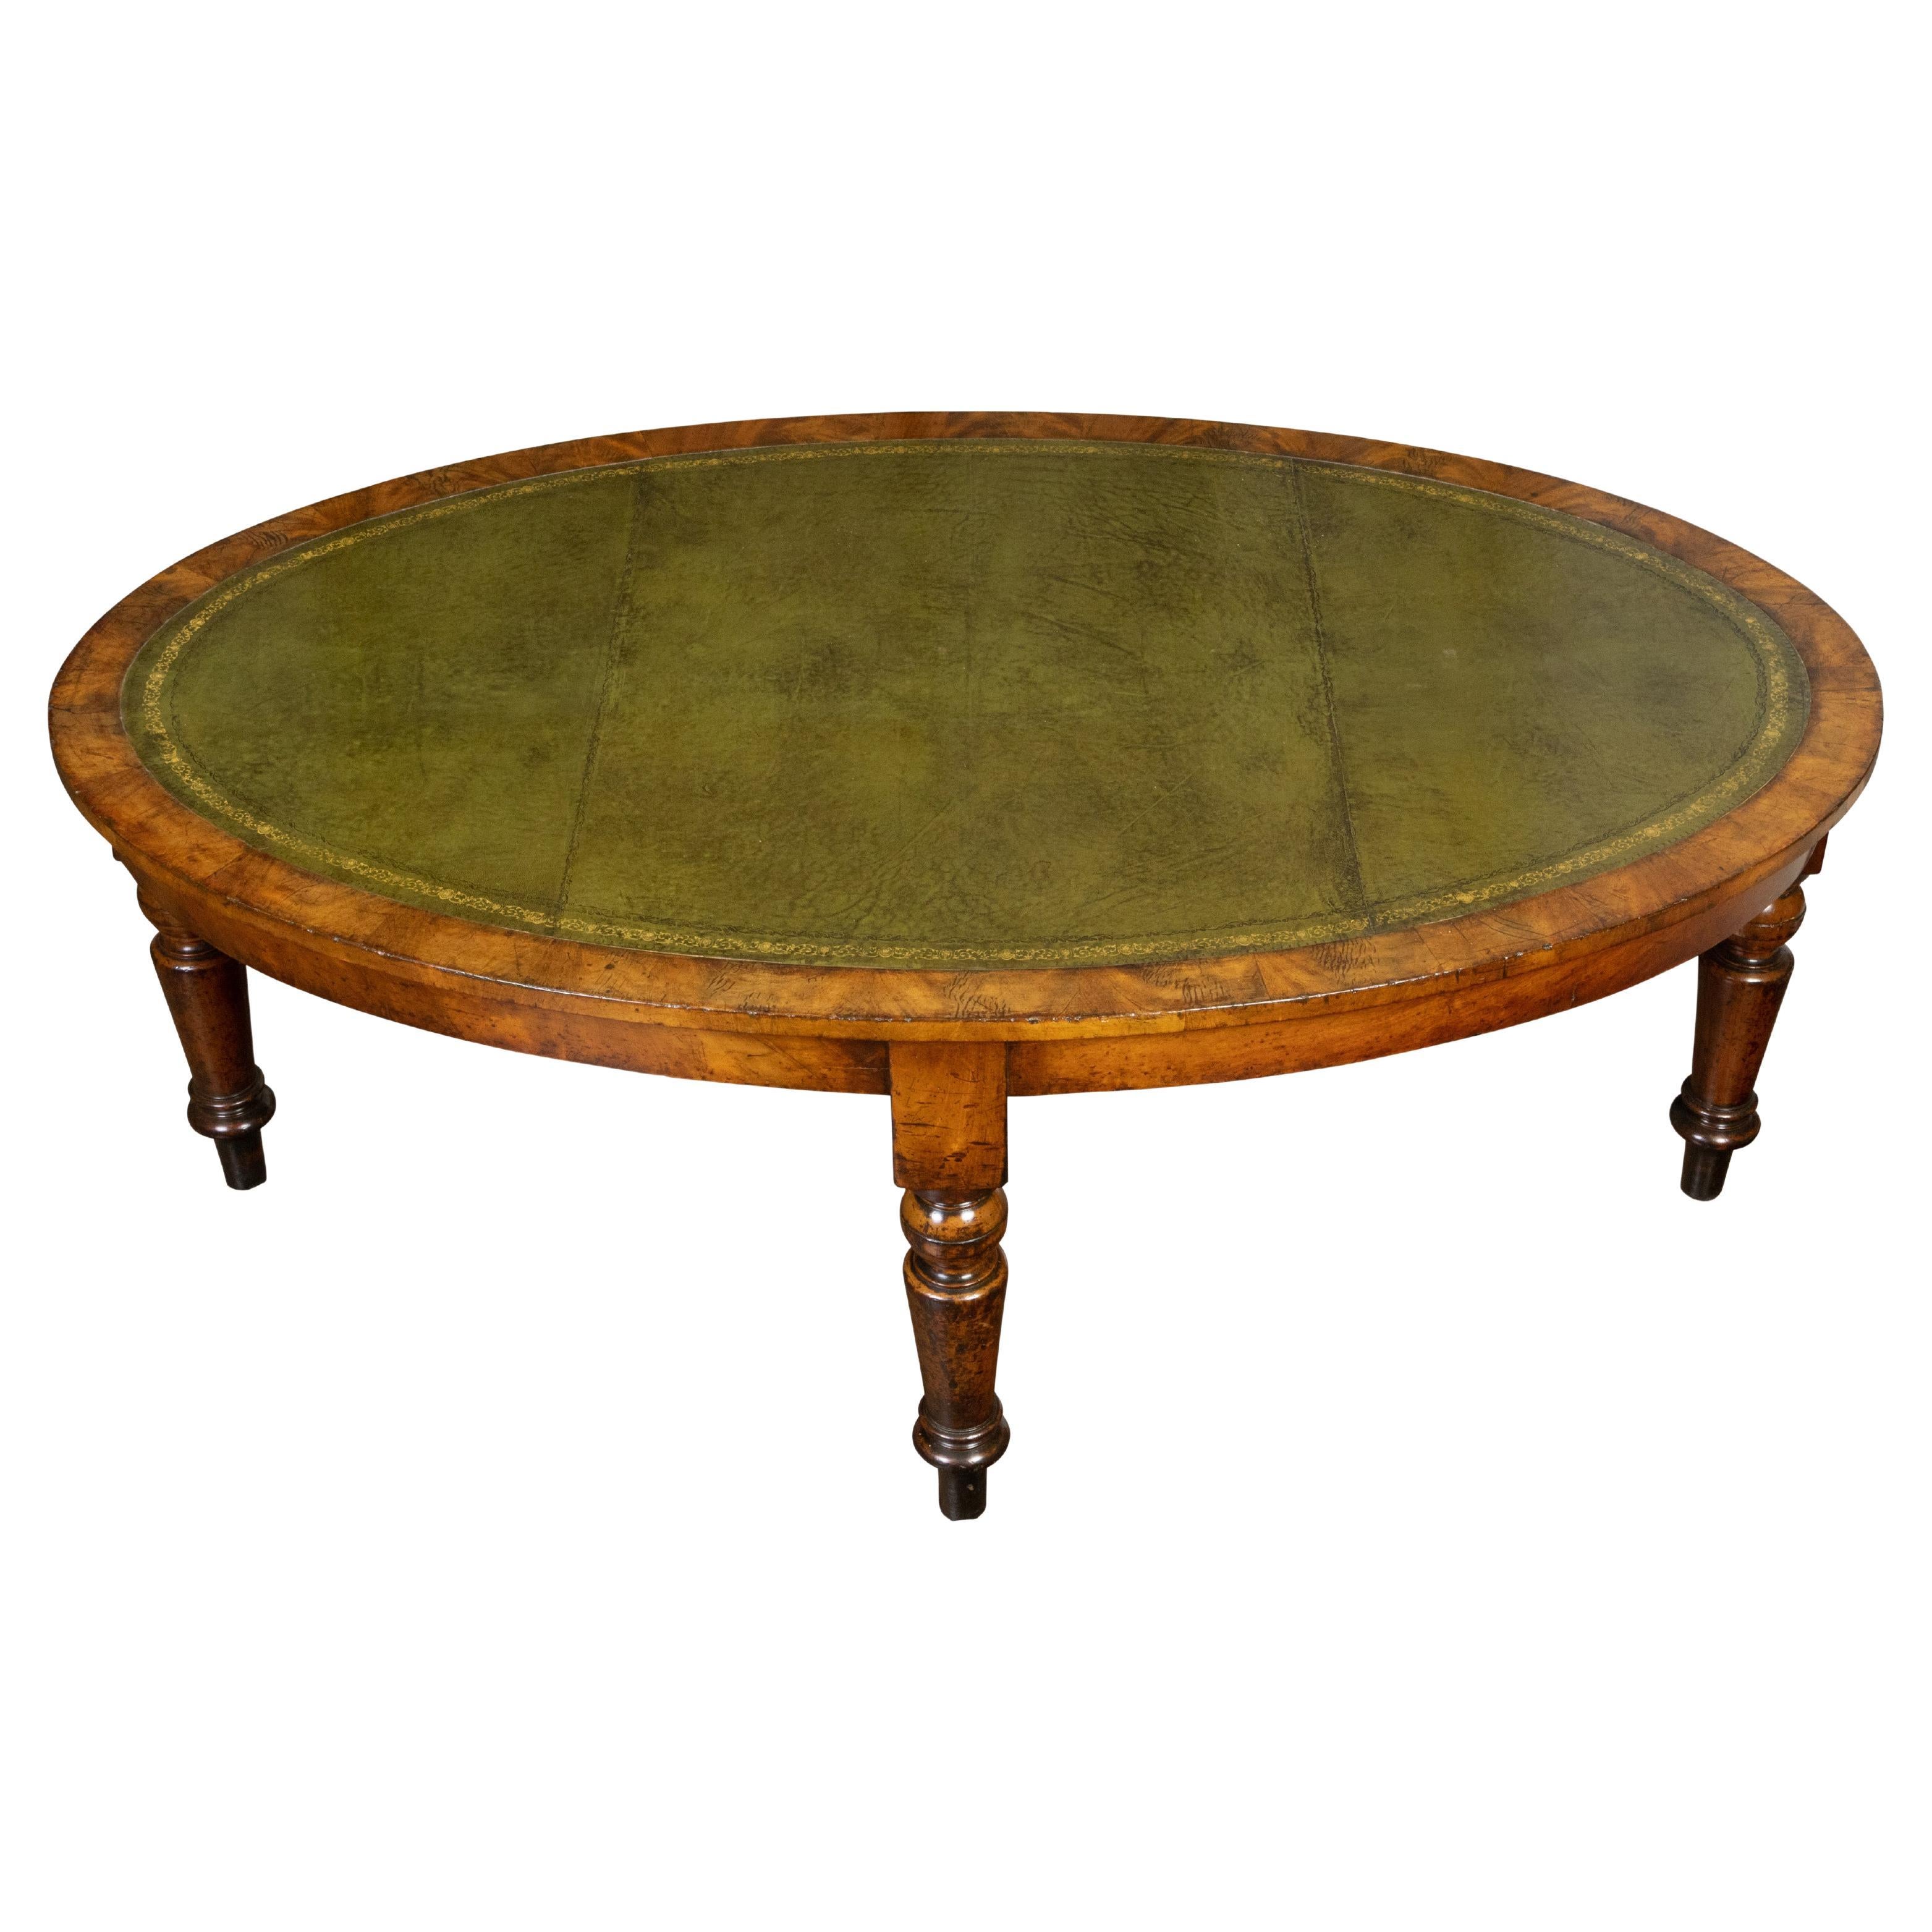 English 19th Century Mahogany Table with Green Leather Oval Top and Turned Legs